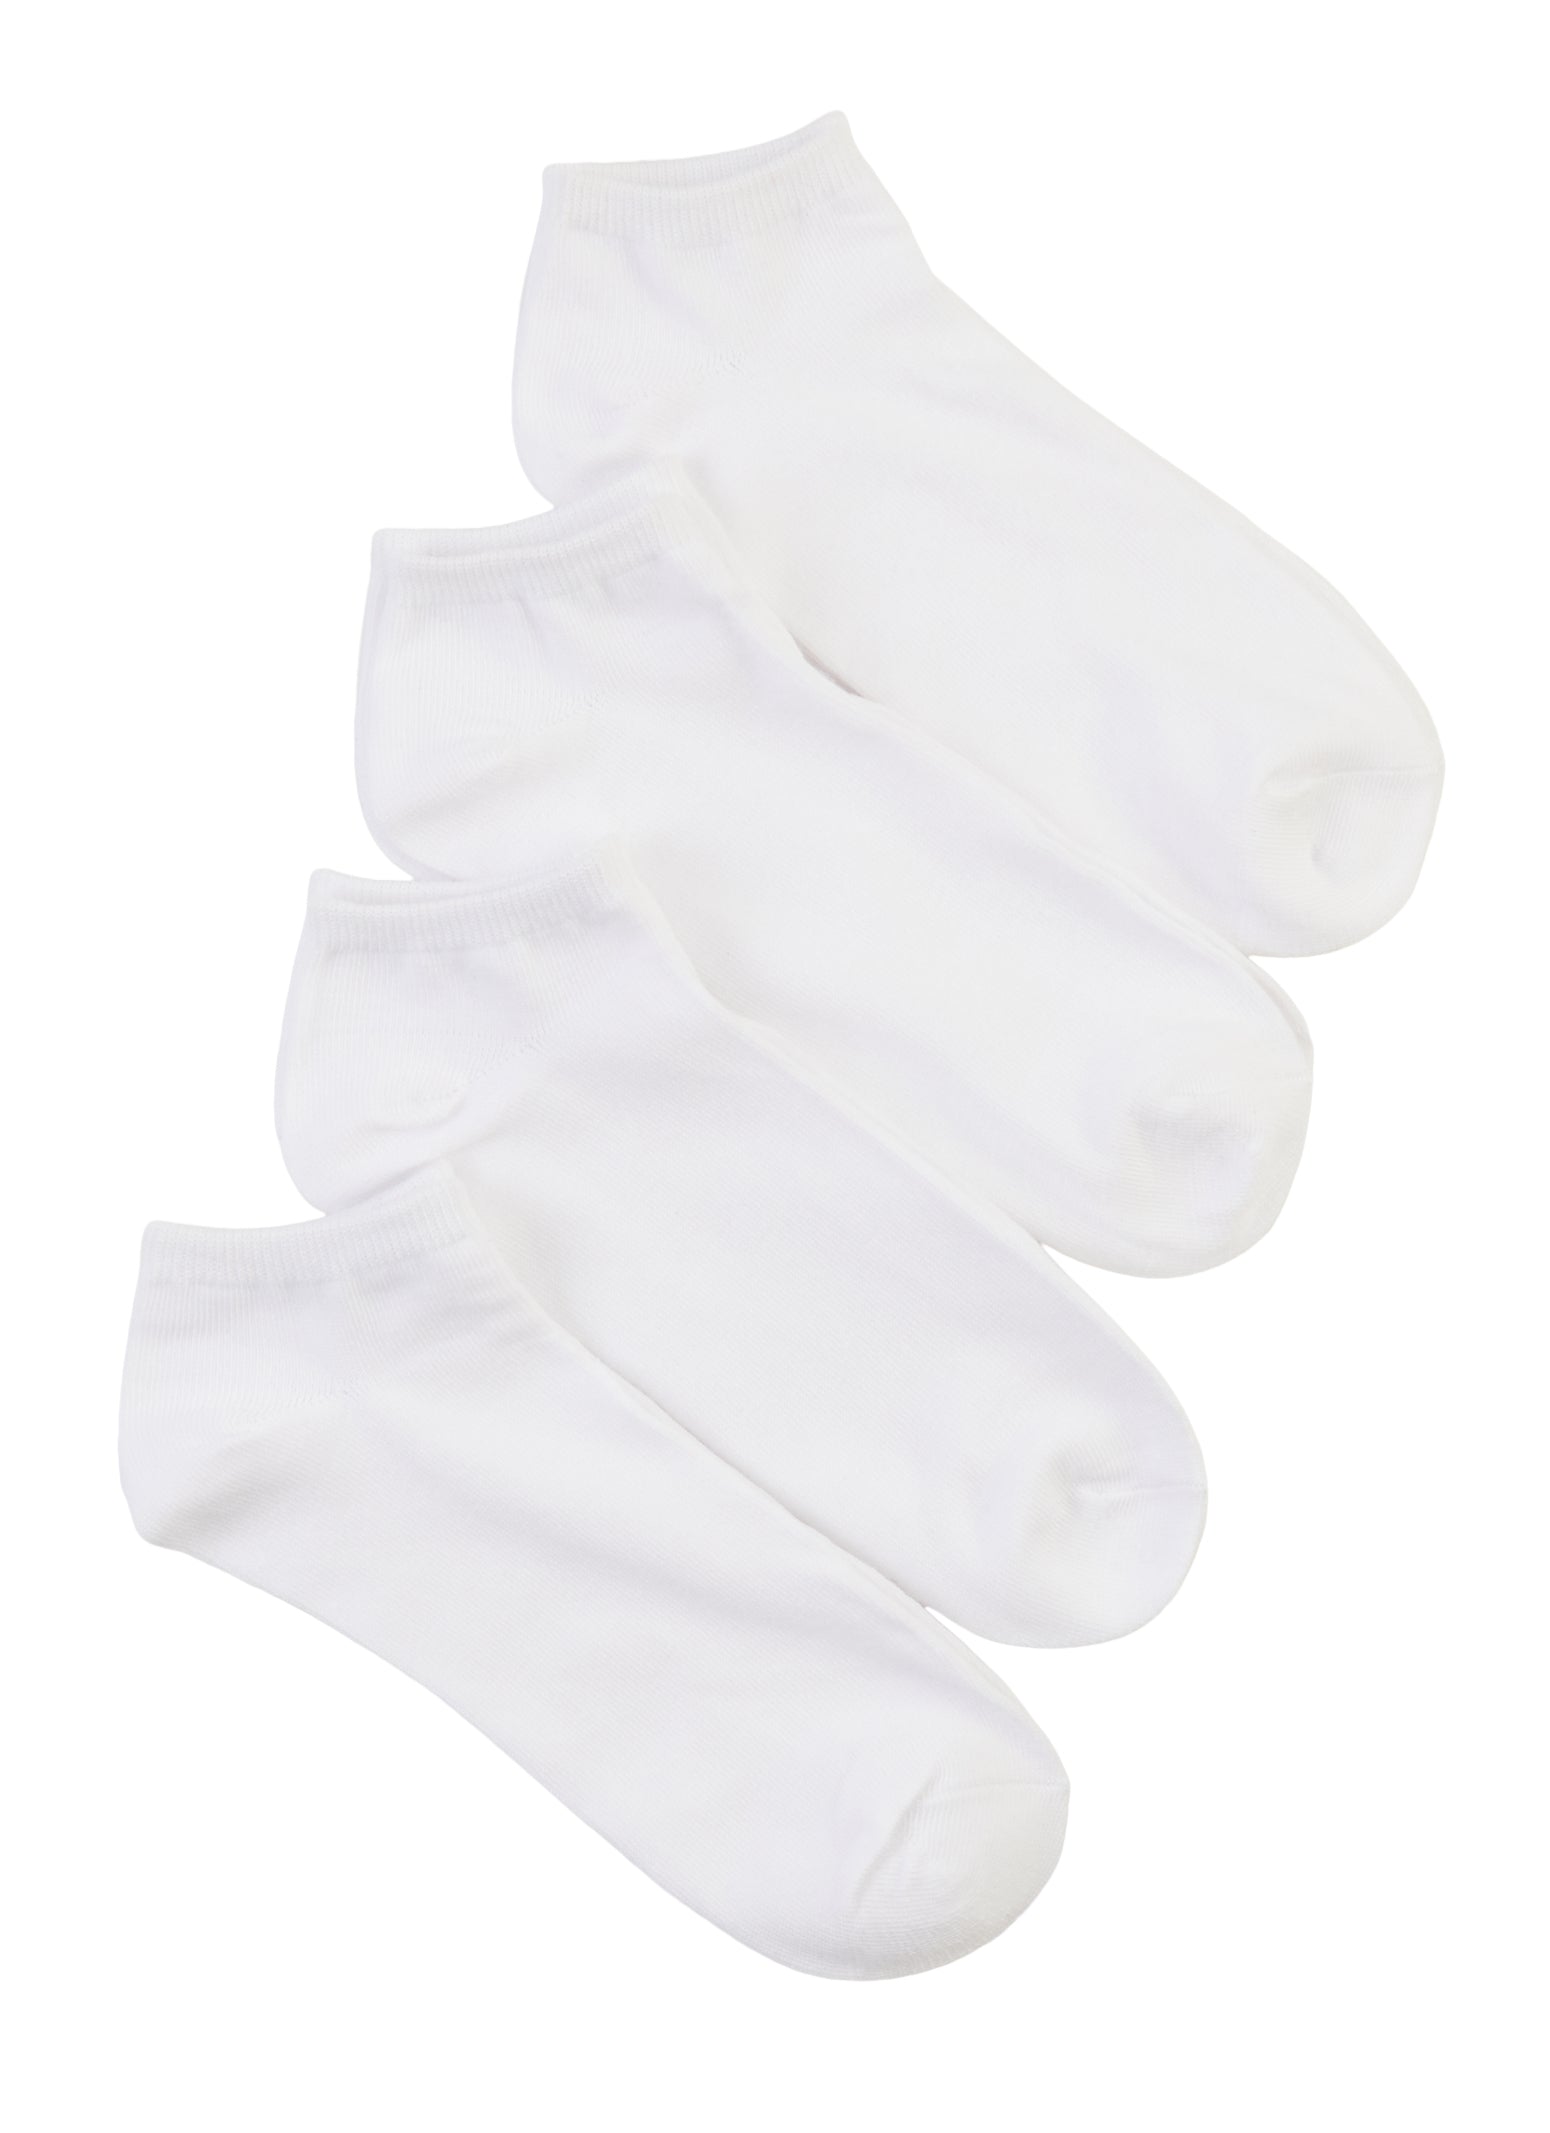 Womens Solids Ankle Socks 4 Pack Size 10-13, White